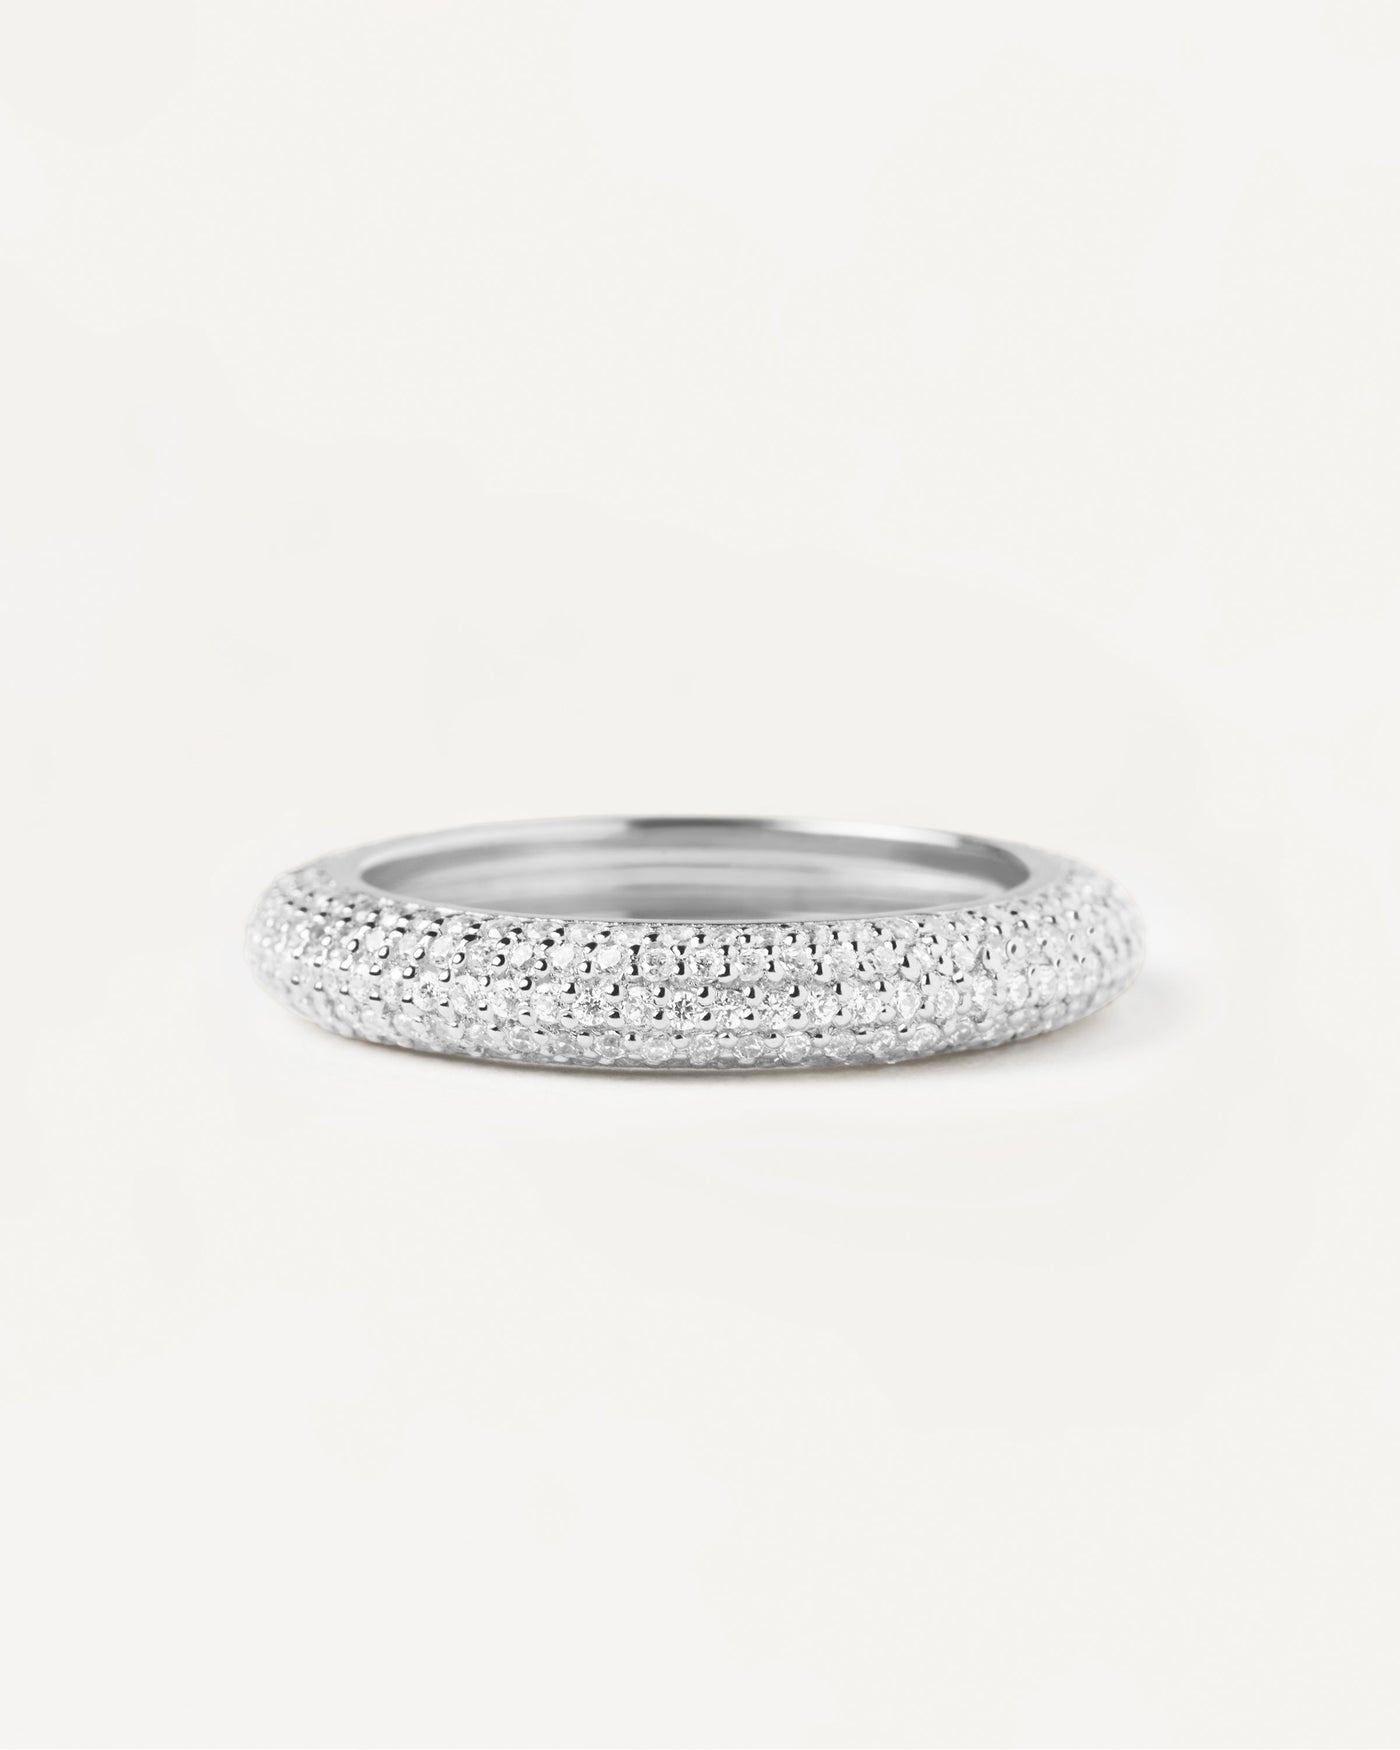 2023 Selection | King Silver Ring. Silver eternity ring with white zirconia. Get the latest arrival from PDPAOLA. Place your order safely and get this Best Seller. Free Shipping.